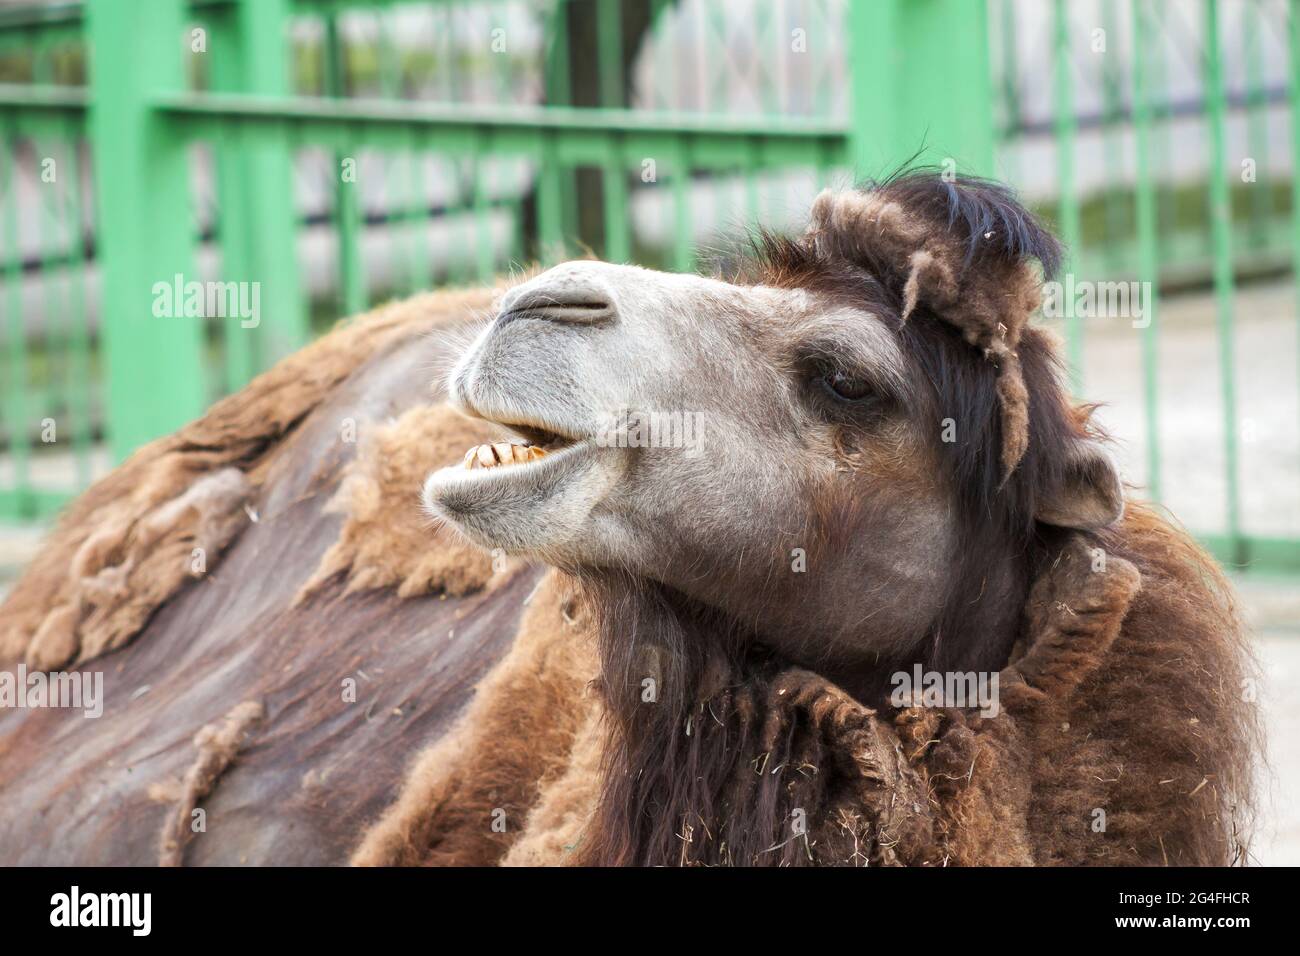 Single bactrian camel in a zoo close-up Stock Photo